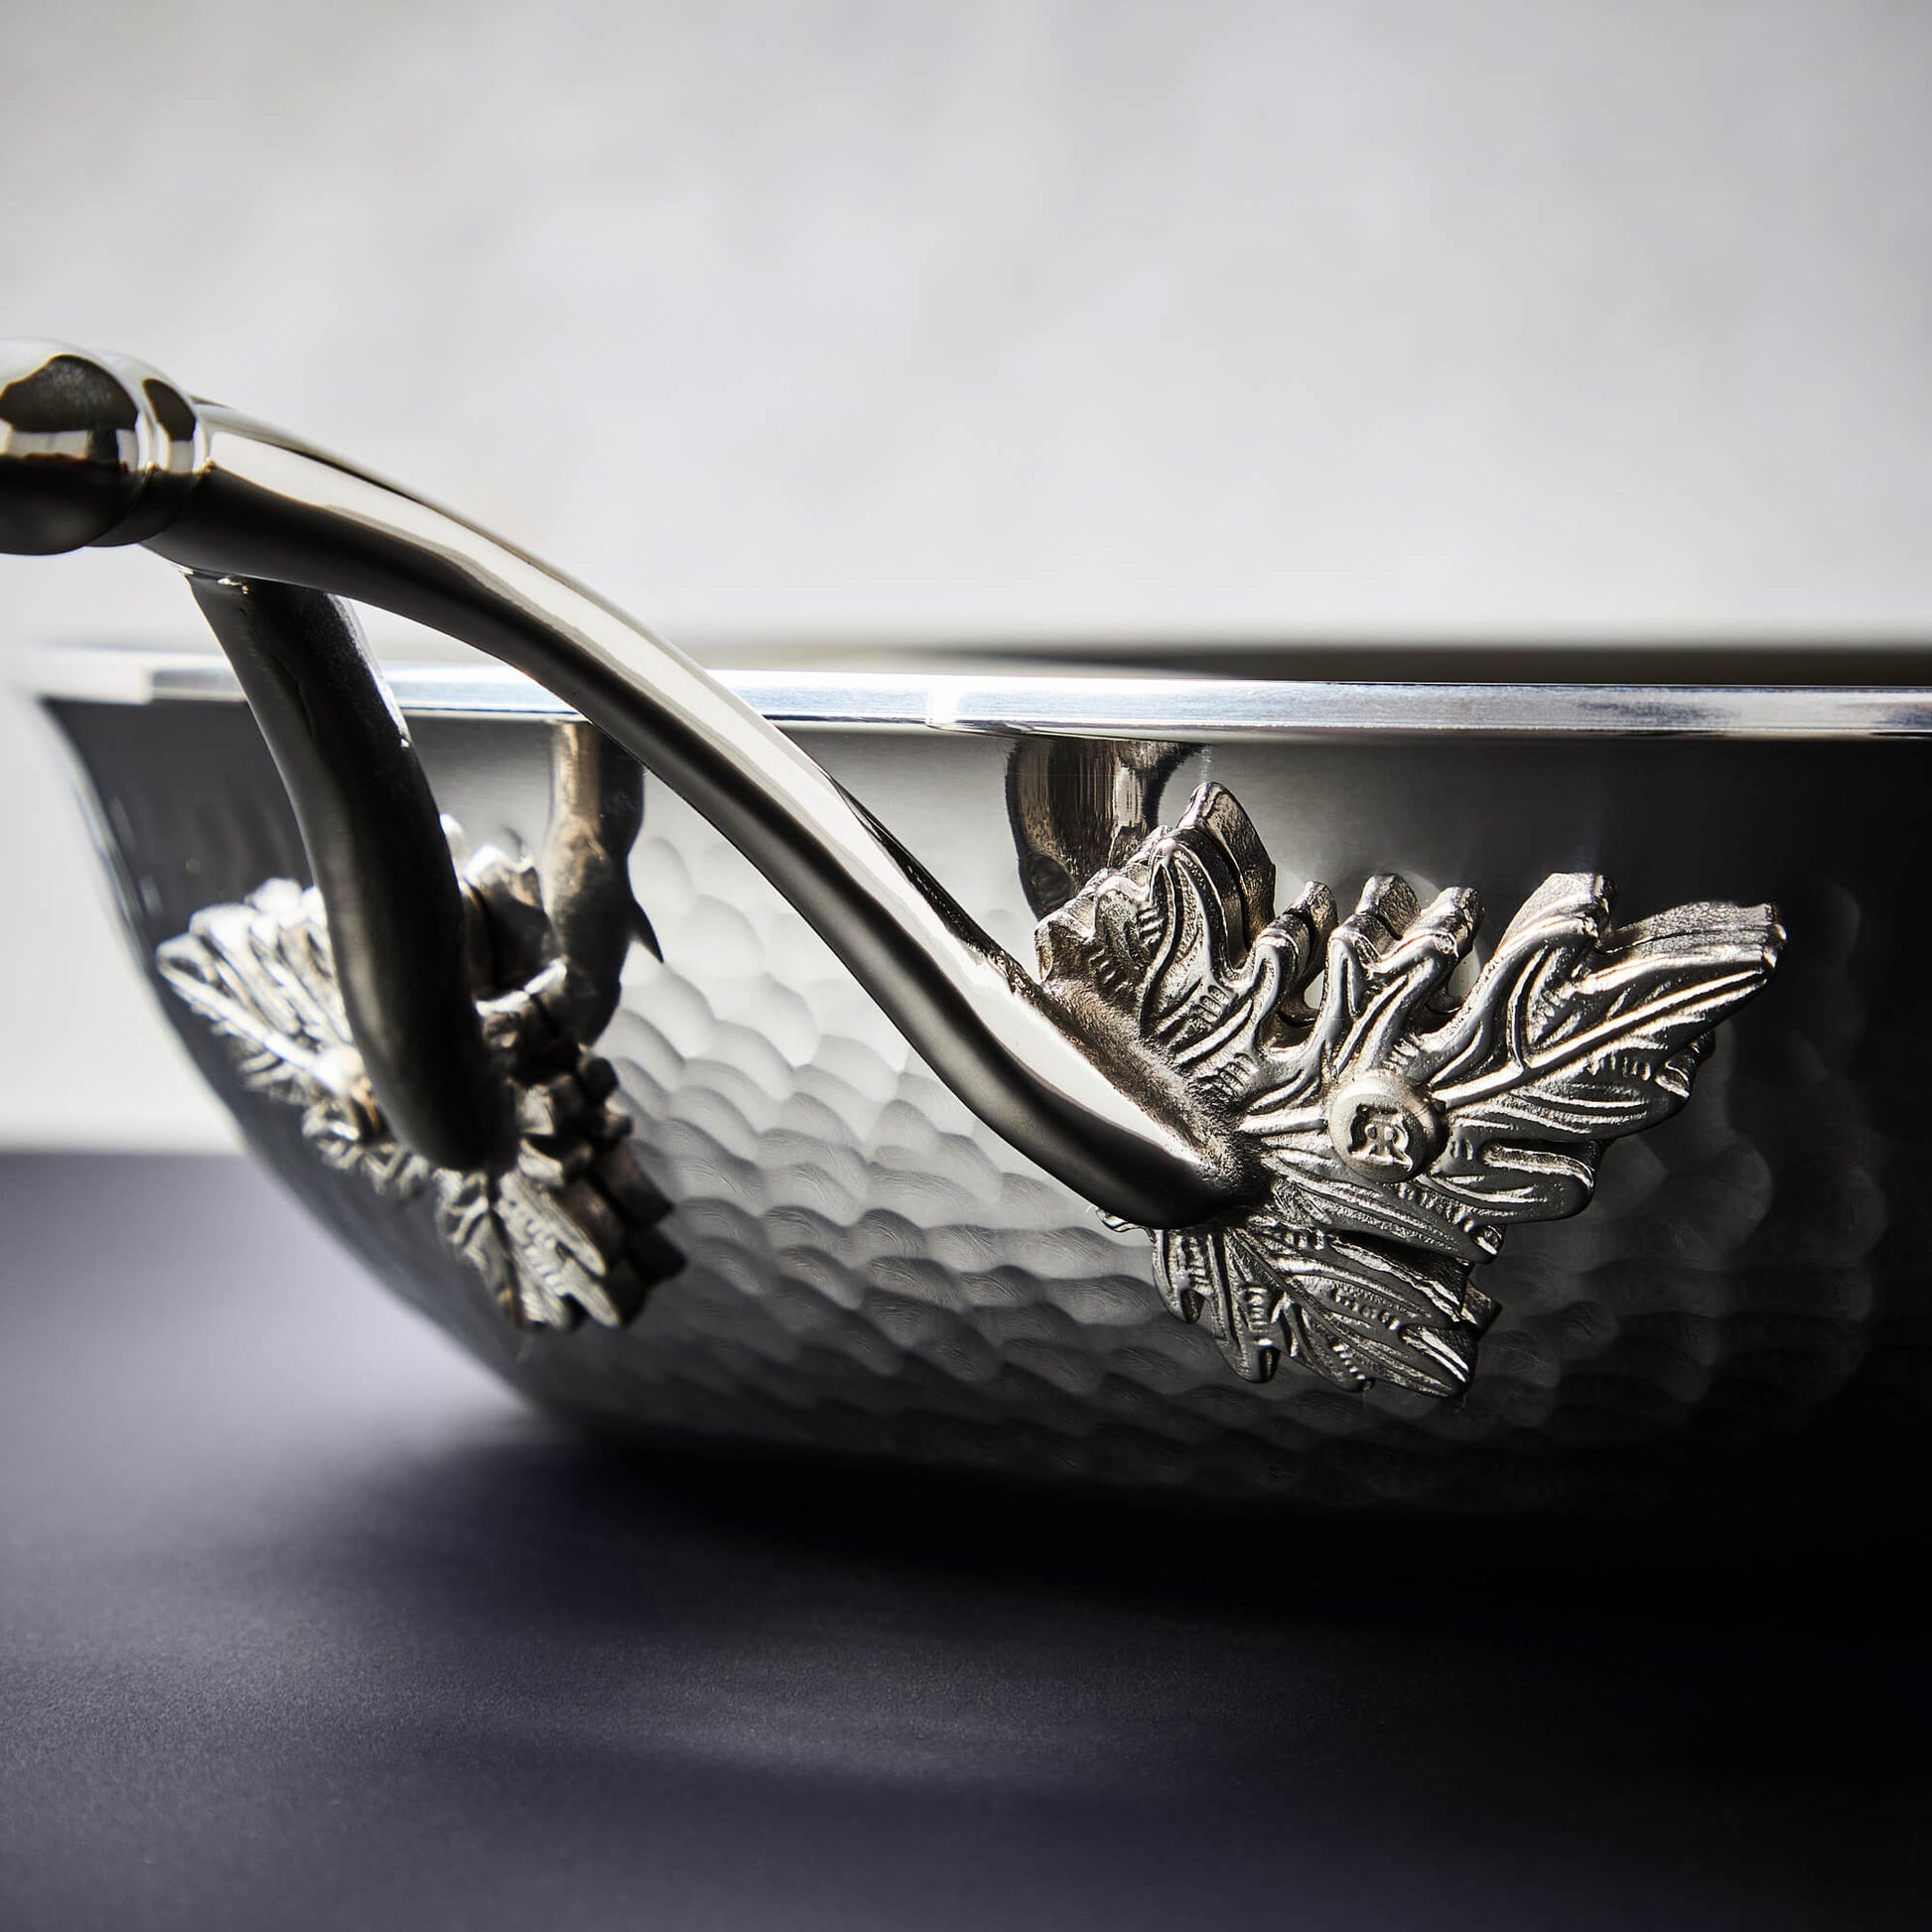 Details of the Opus Prima hammered clad stainless steel  pan with decorated silver-plated  from Ruffoni